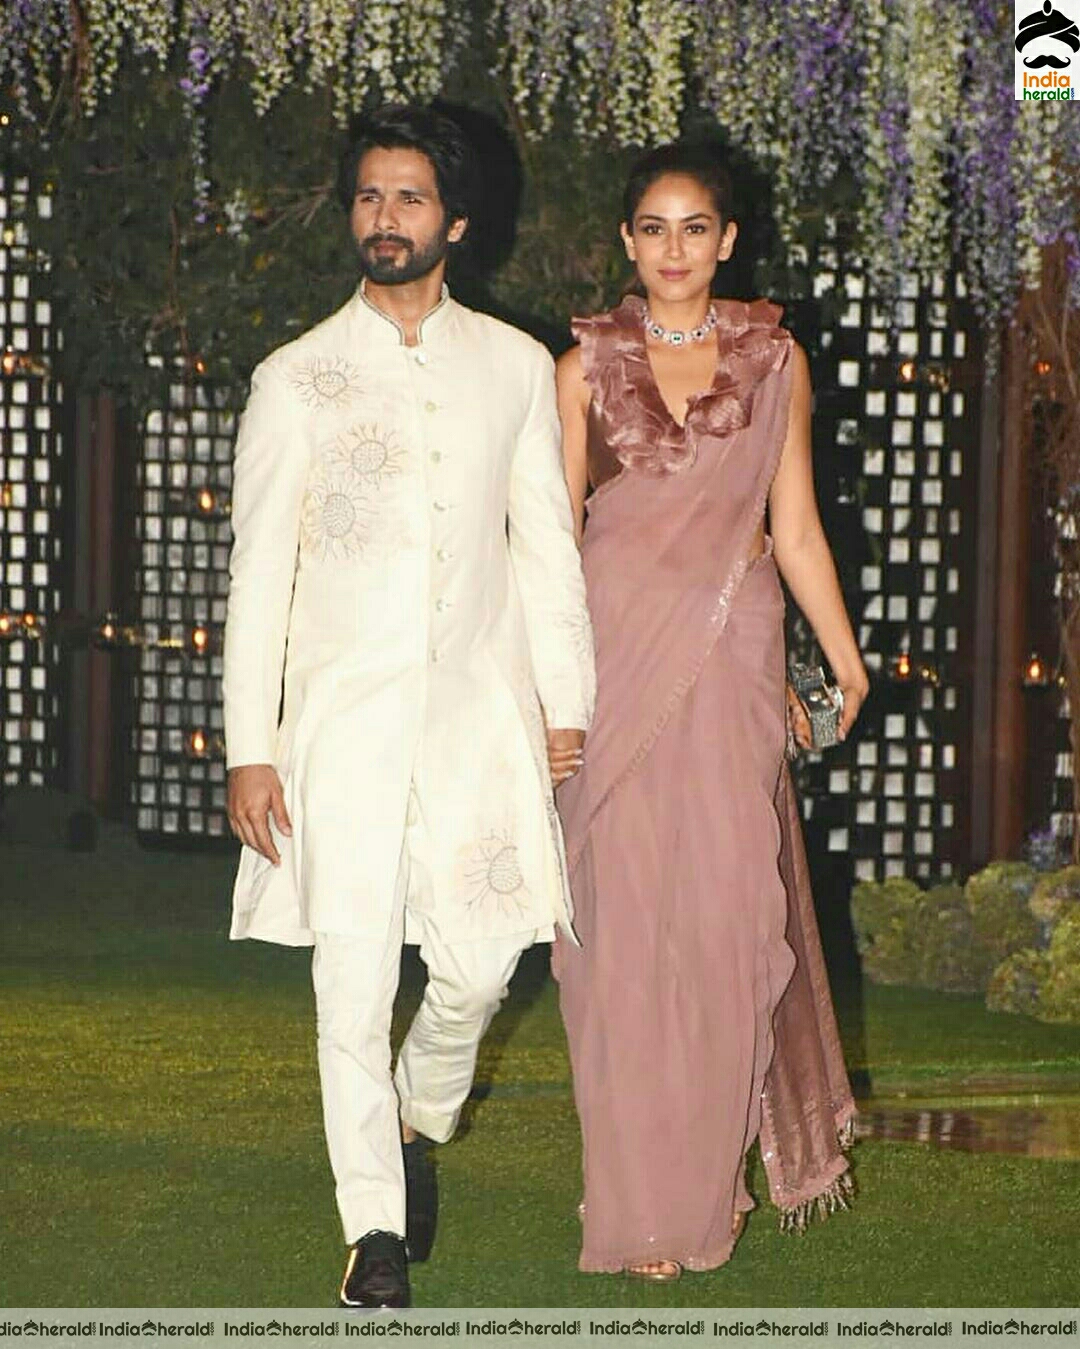 Shahid Kapoor spotted along with his wife Mira Rajput at a wedding in Mumbai